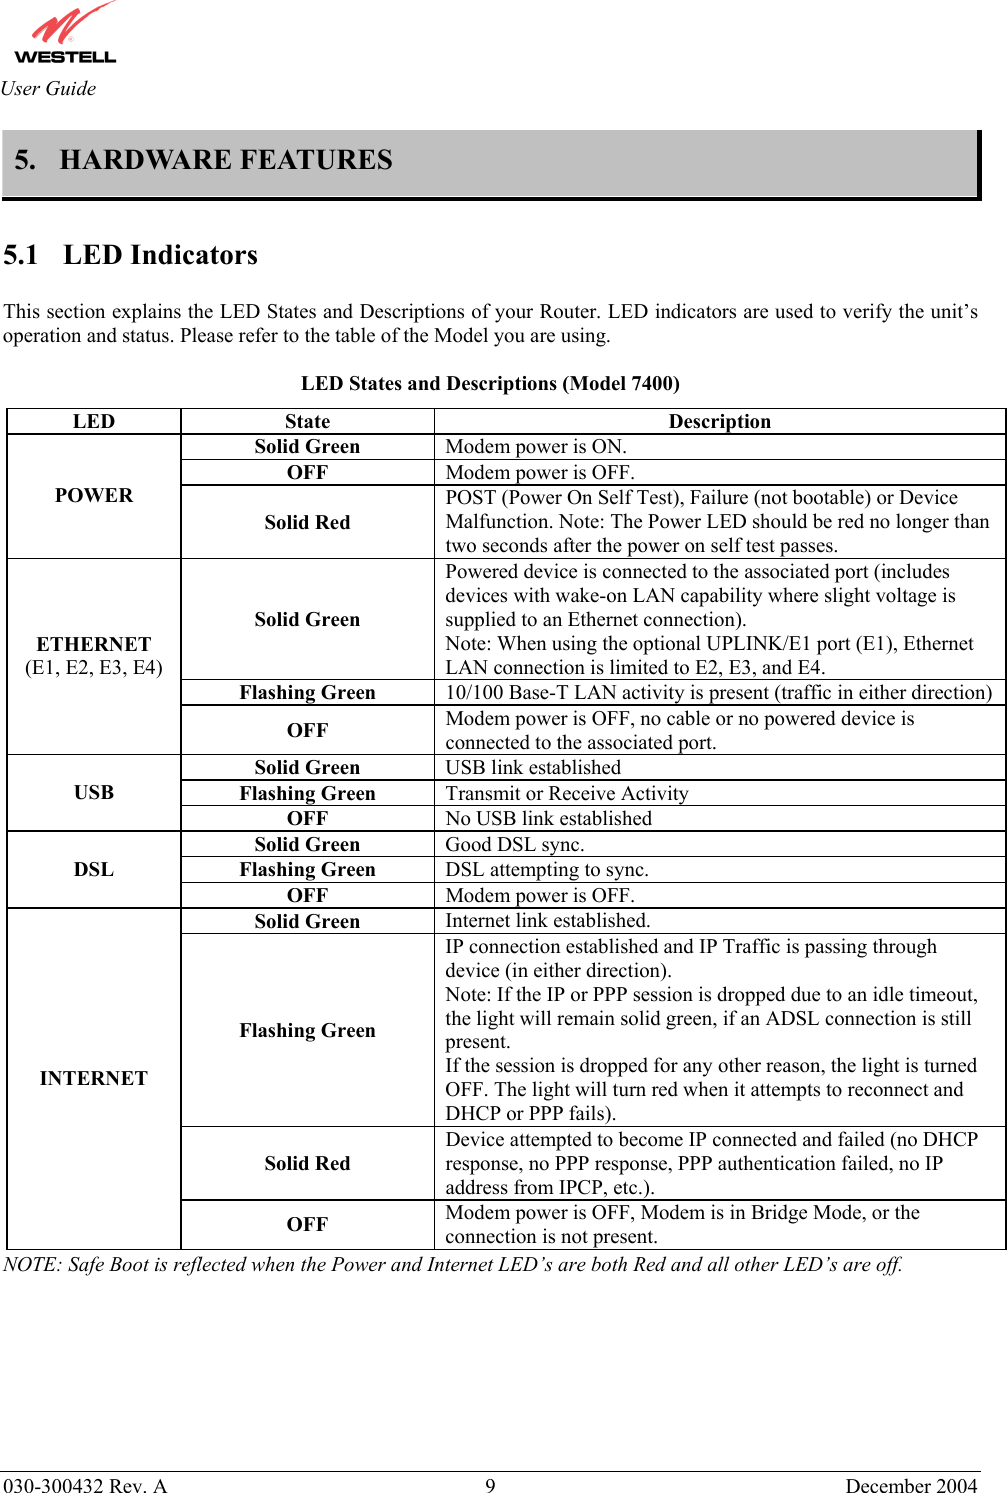       030-300432 Rev. A 9  December 2004  User Guide 5. HARDWARE FEATURES  5.1 LED Indicators  This section explains the LED States and Descriptions of your Router. LED indicators are used to verify the unit’s operation and status. Please refer to the table of the Model you are using.  LED States and Descriptions (Model 7400) LED State  Description Solid Green  Modem power is ON. OFF  Modem power is OFF. POWER Solid Red POST (Power On Self Test), Failure (not bootable) or Device Malfunction. Note: The Power LED should be red no longer than two seconds after the power on self test passes. Solid Green Powered device is connected to the associated port (includes devices with wake-on LAN capability where slight voltage is supplied to an Ethernet connection). Note: When using the optional UPLINK/E1 port (E1), Ethernet LAN connection is limited to E2, E3, and E4. Flashing Green  10/100 Base-T LAN activity is present (traffic in either direction) ETHERNET (E1, E2, E3, E4) OFF  Modem power is OFF, no cable or no powered device is connected to the associated port. Solid Green  USB link established Flashing Green  Transmit or Receive Activity USB OFF  No USB link established Solid Green  Good DSL sync. Flashing Green   DSL attempting to sync.  DSL OFF  Modem power is OFF. Solid Green  Internet link established. Flashing Green IP connection established and IP Traffic is passing through device (in either direction). Note: If the IP or PPP session is dropped due to an idle timeout, the light will remain solid green, if an ADSL connection is still present.  If the session is dropped for any other reason, the light is turned OFF. The light will turn red when it attempts to reconnect and DHCP or PPP fails). Solid Red Device attempted to become IP connected and failed (no DHCP response, no PPP response, PPP authentication failed, no IP address from IPCP, etc.). INTERNET OFF  Modem power is OFF, Modem is in Bridge Mode, or the connection is not present. NOTE: Safe Boot is reflected when the Power and Internet LED’s are both Red and all other LED’s are off.         